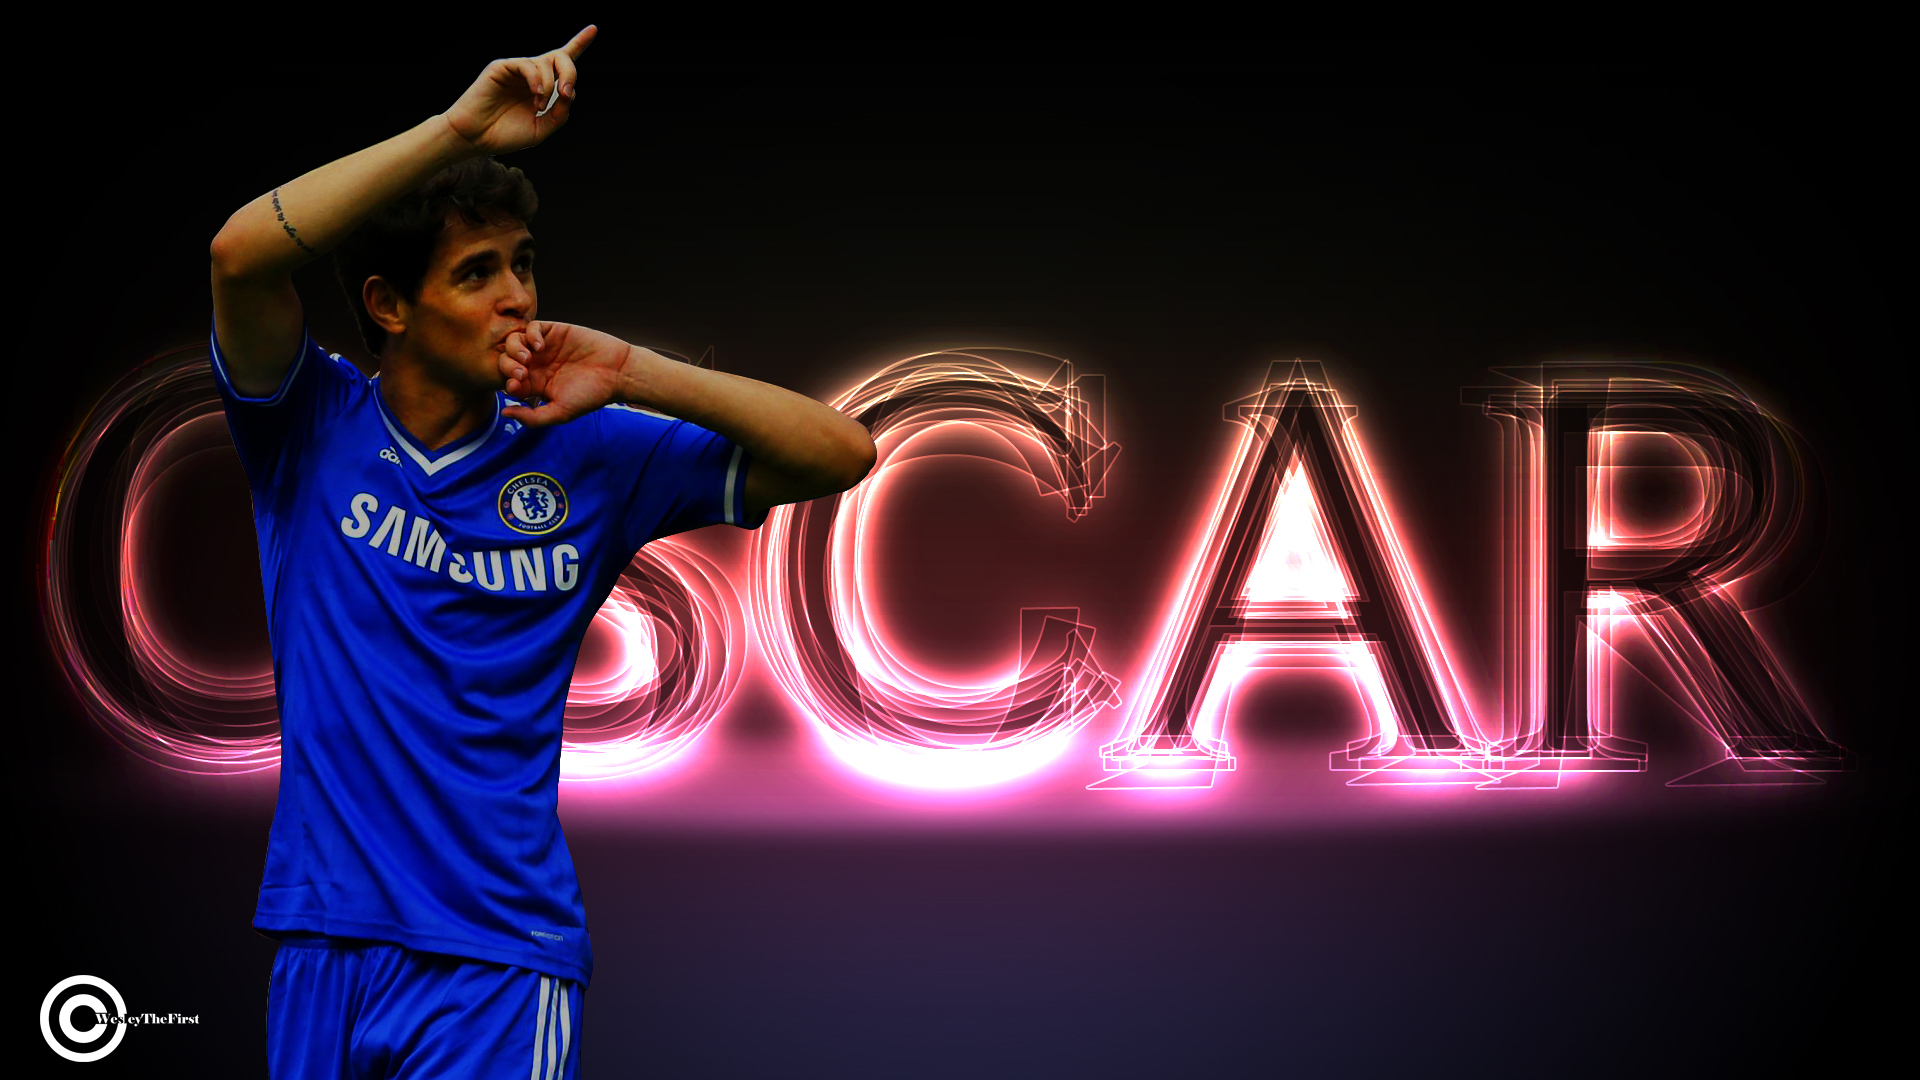 Download HQ oscar by wesleythefirst Football wallpaper / 1920x1080